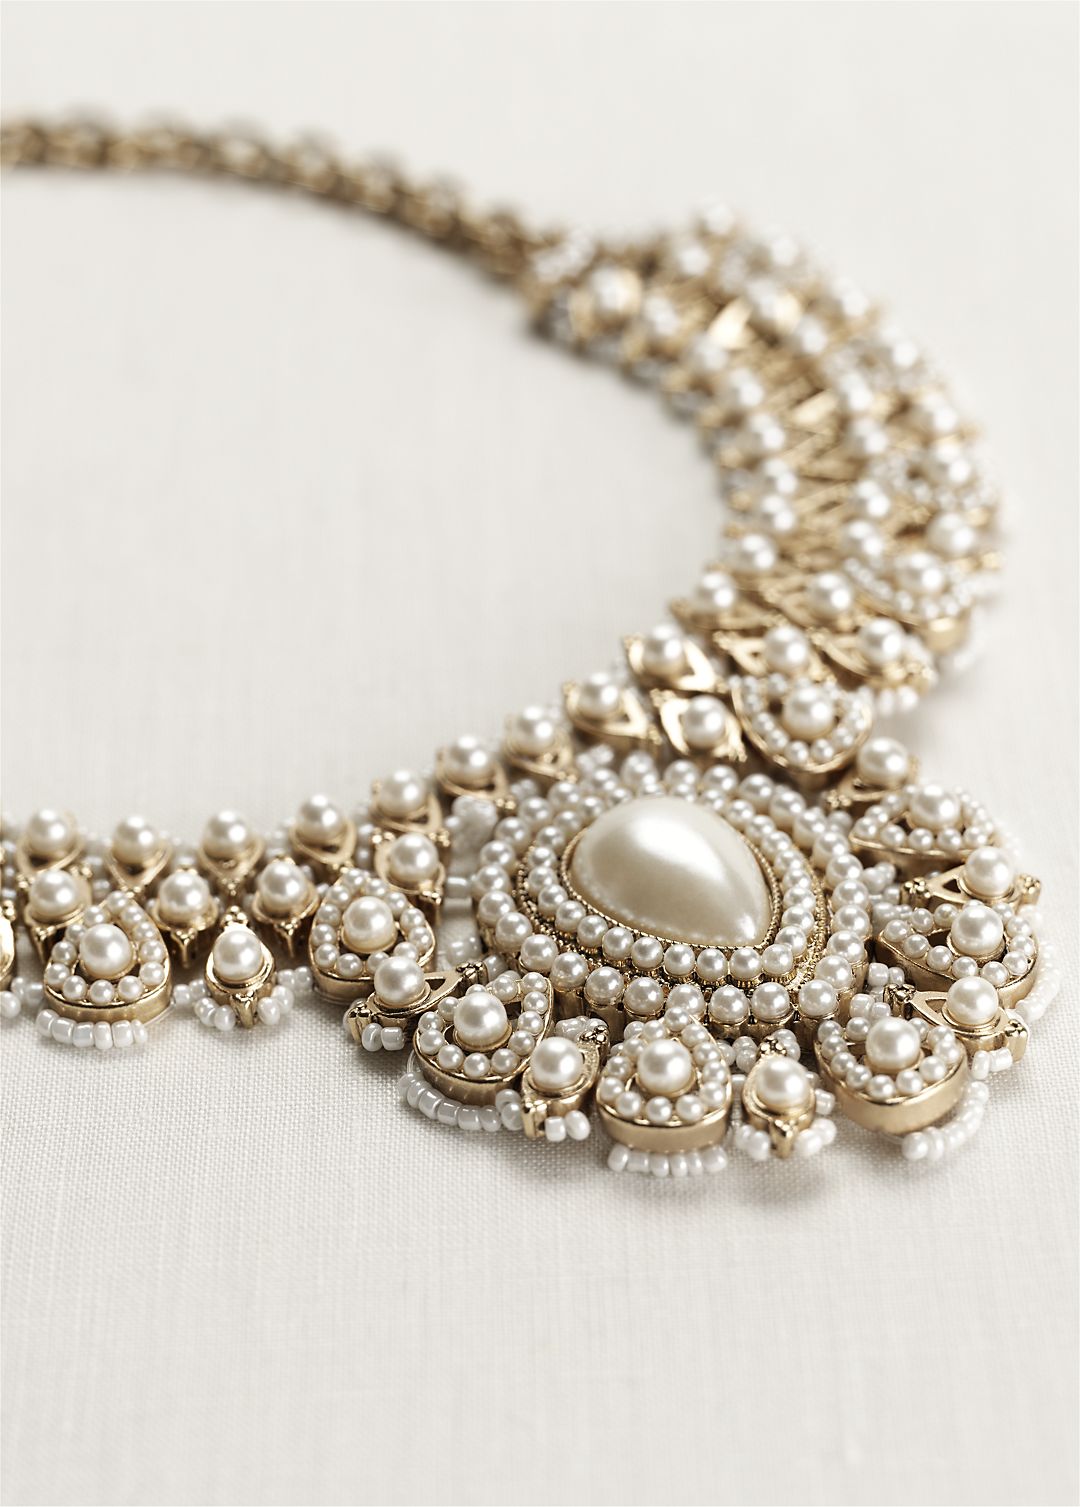 Woven Bead and Pearl Statement Necklace Image 1